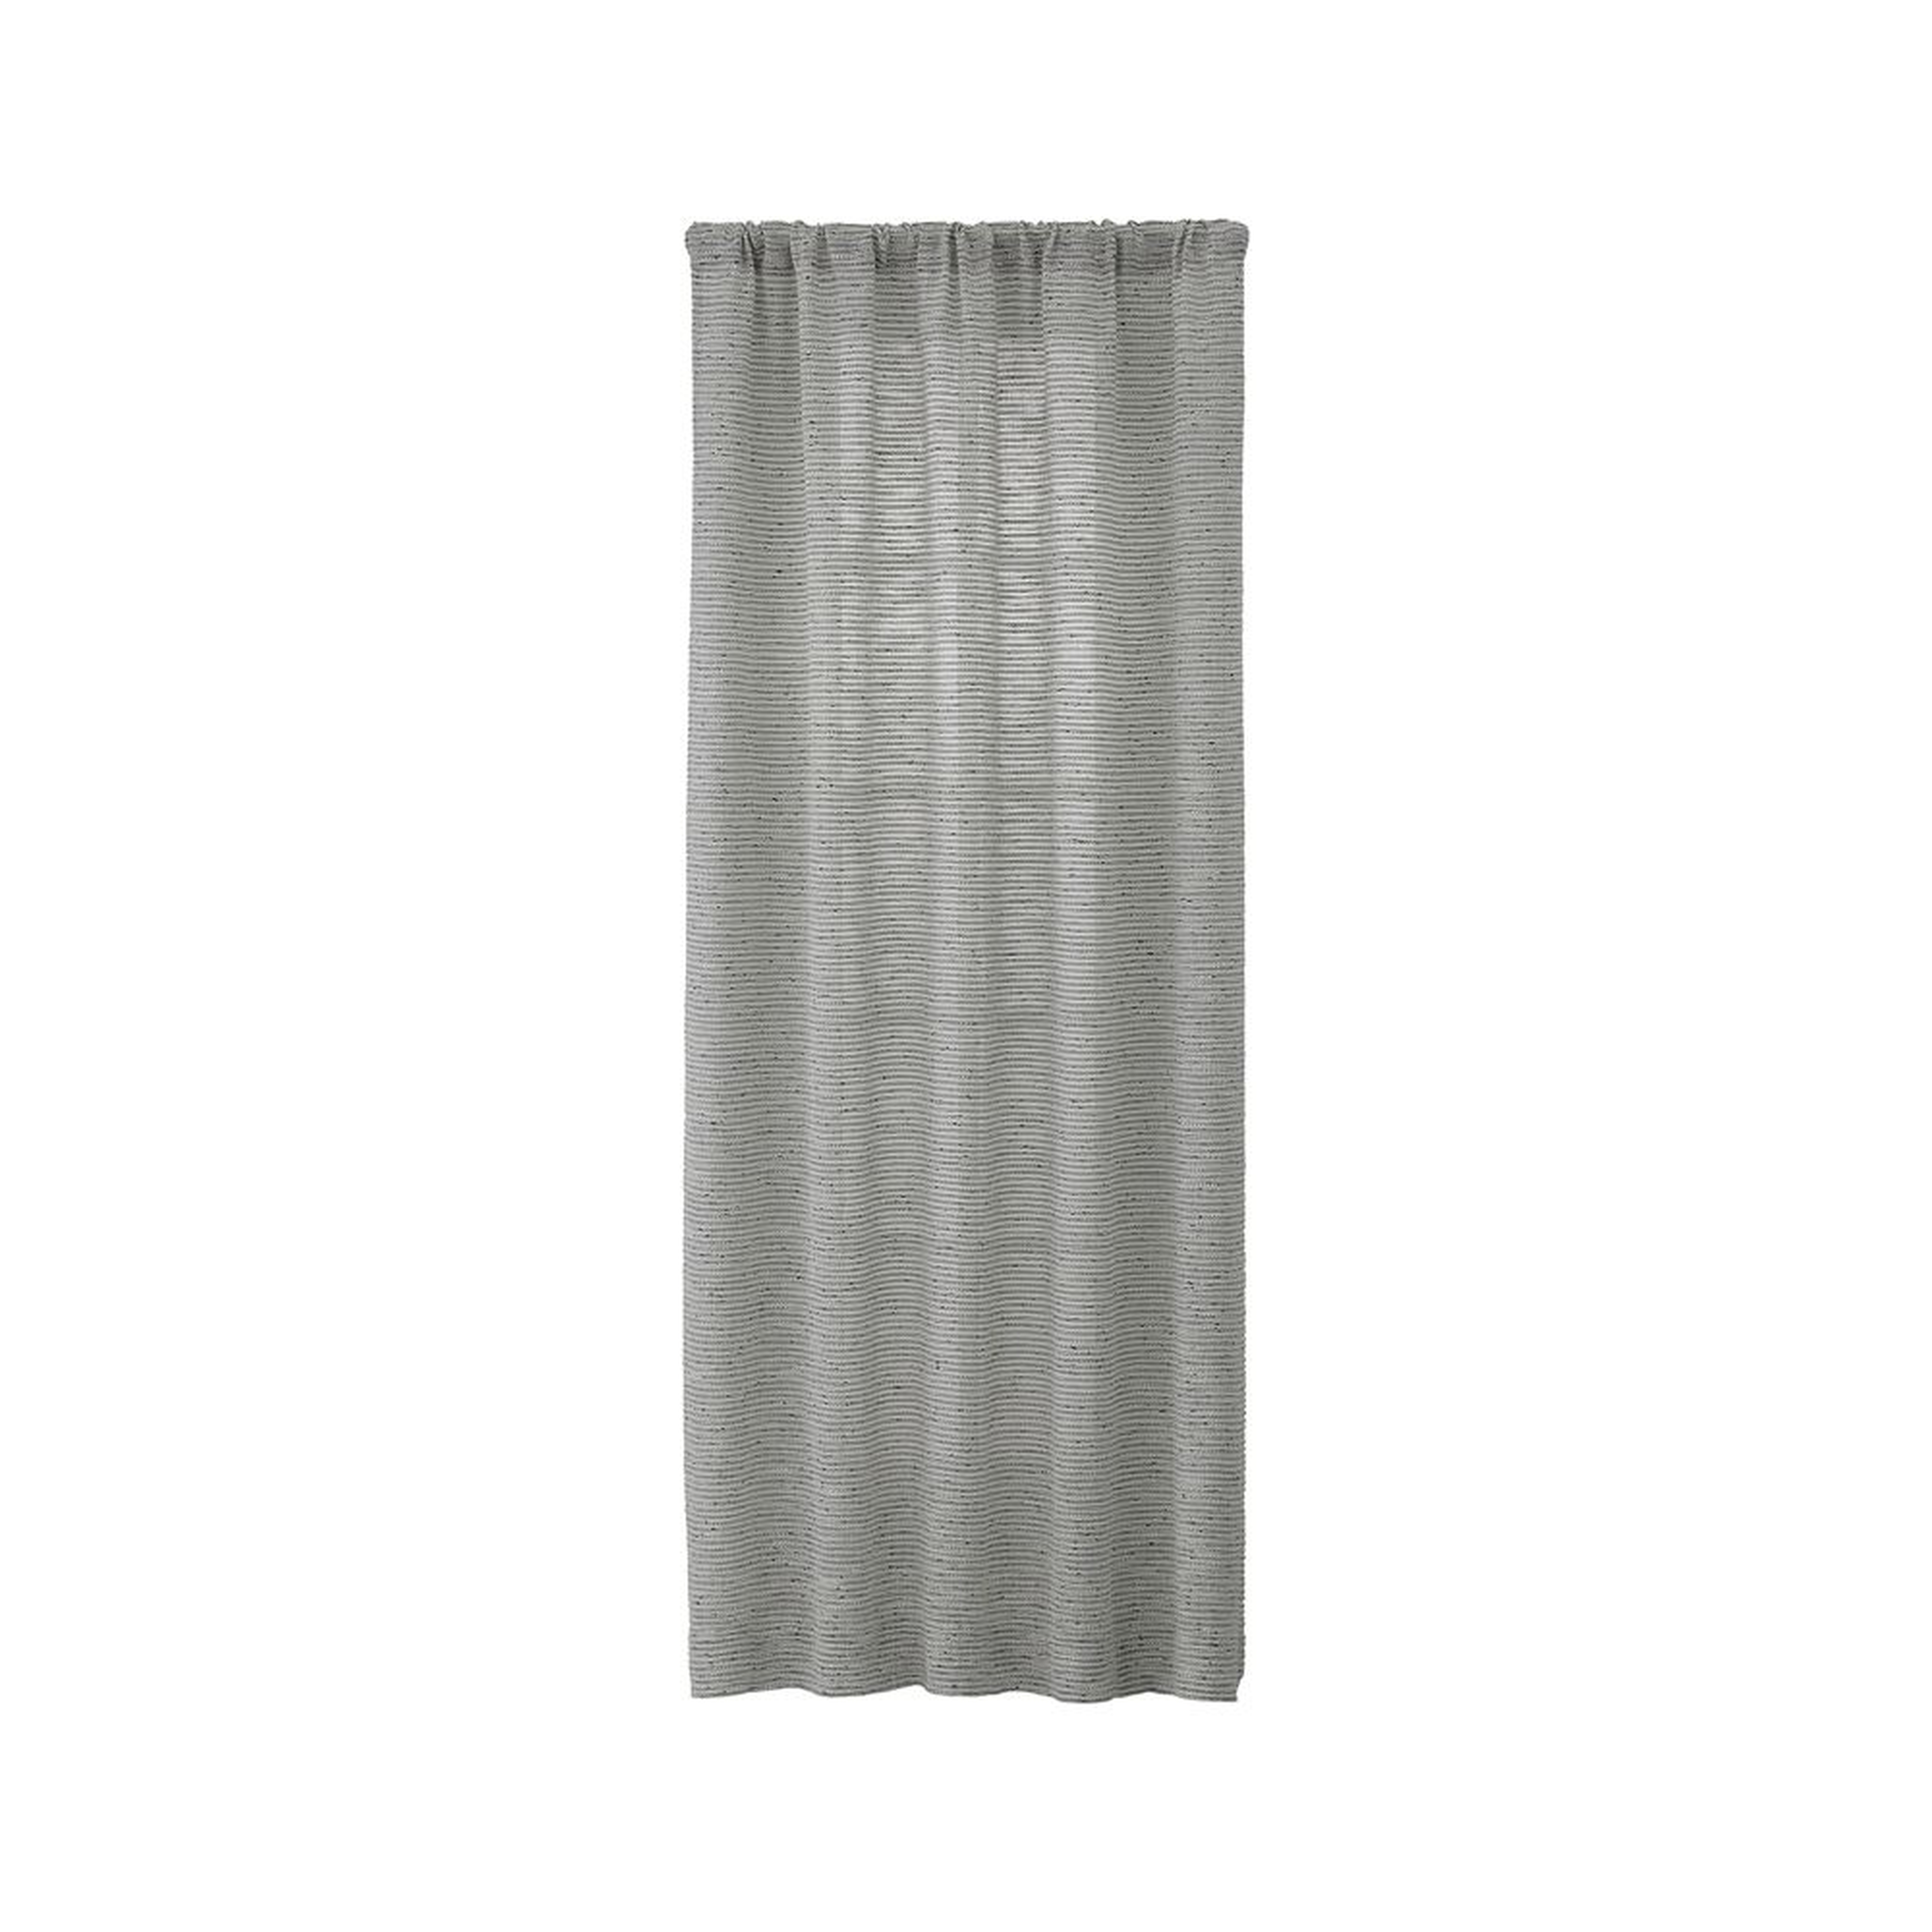 Vesta Textured Curtain Panel 50"x84" - Crate and Barrel